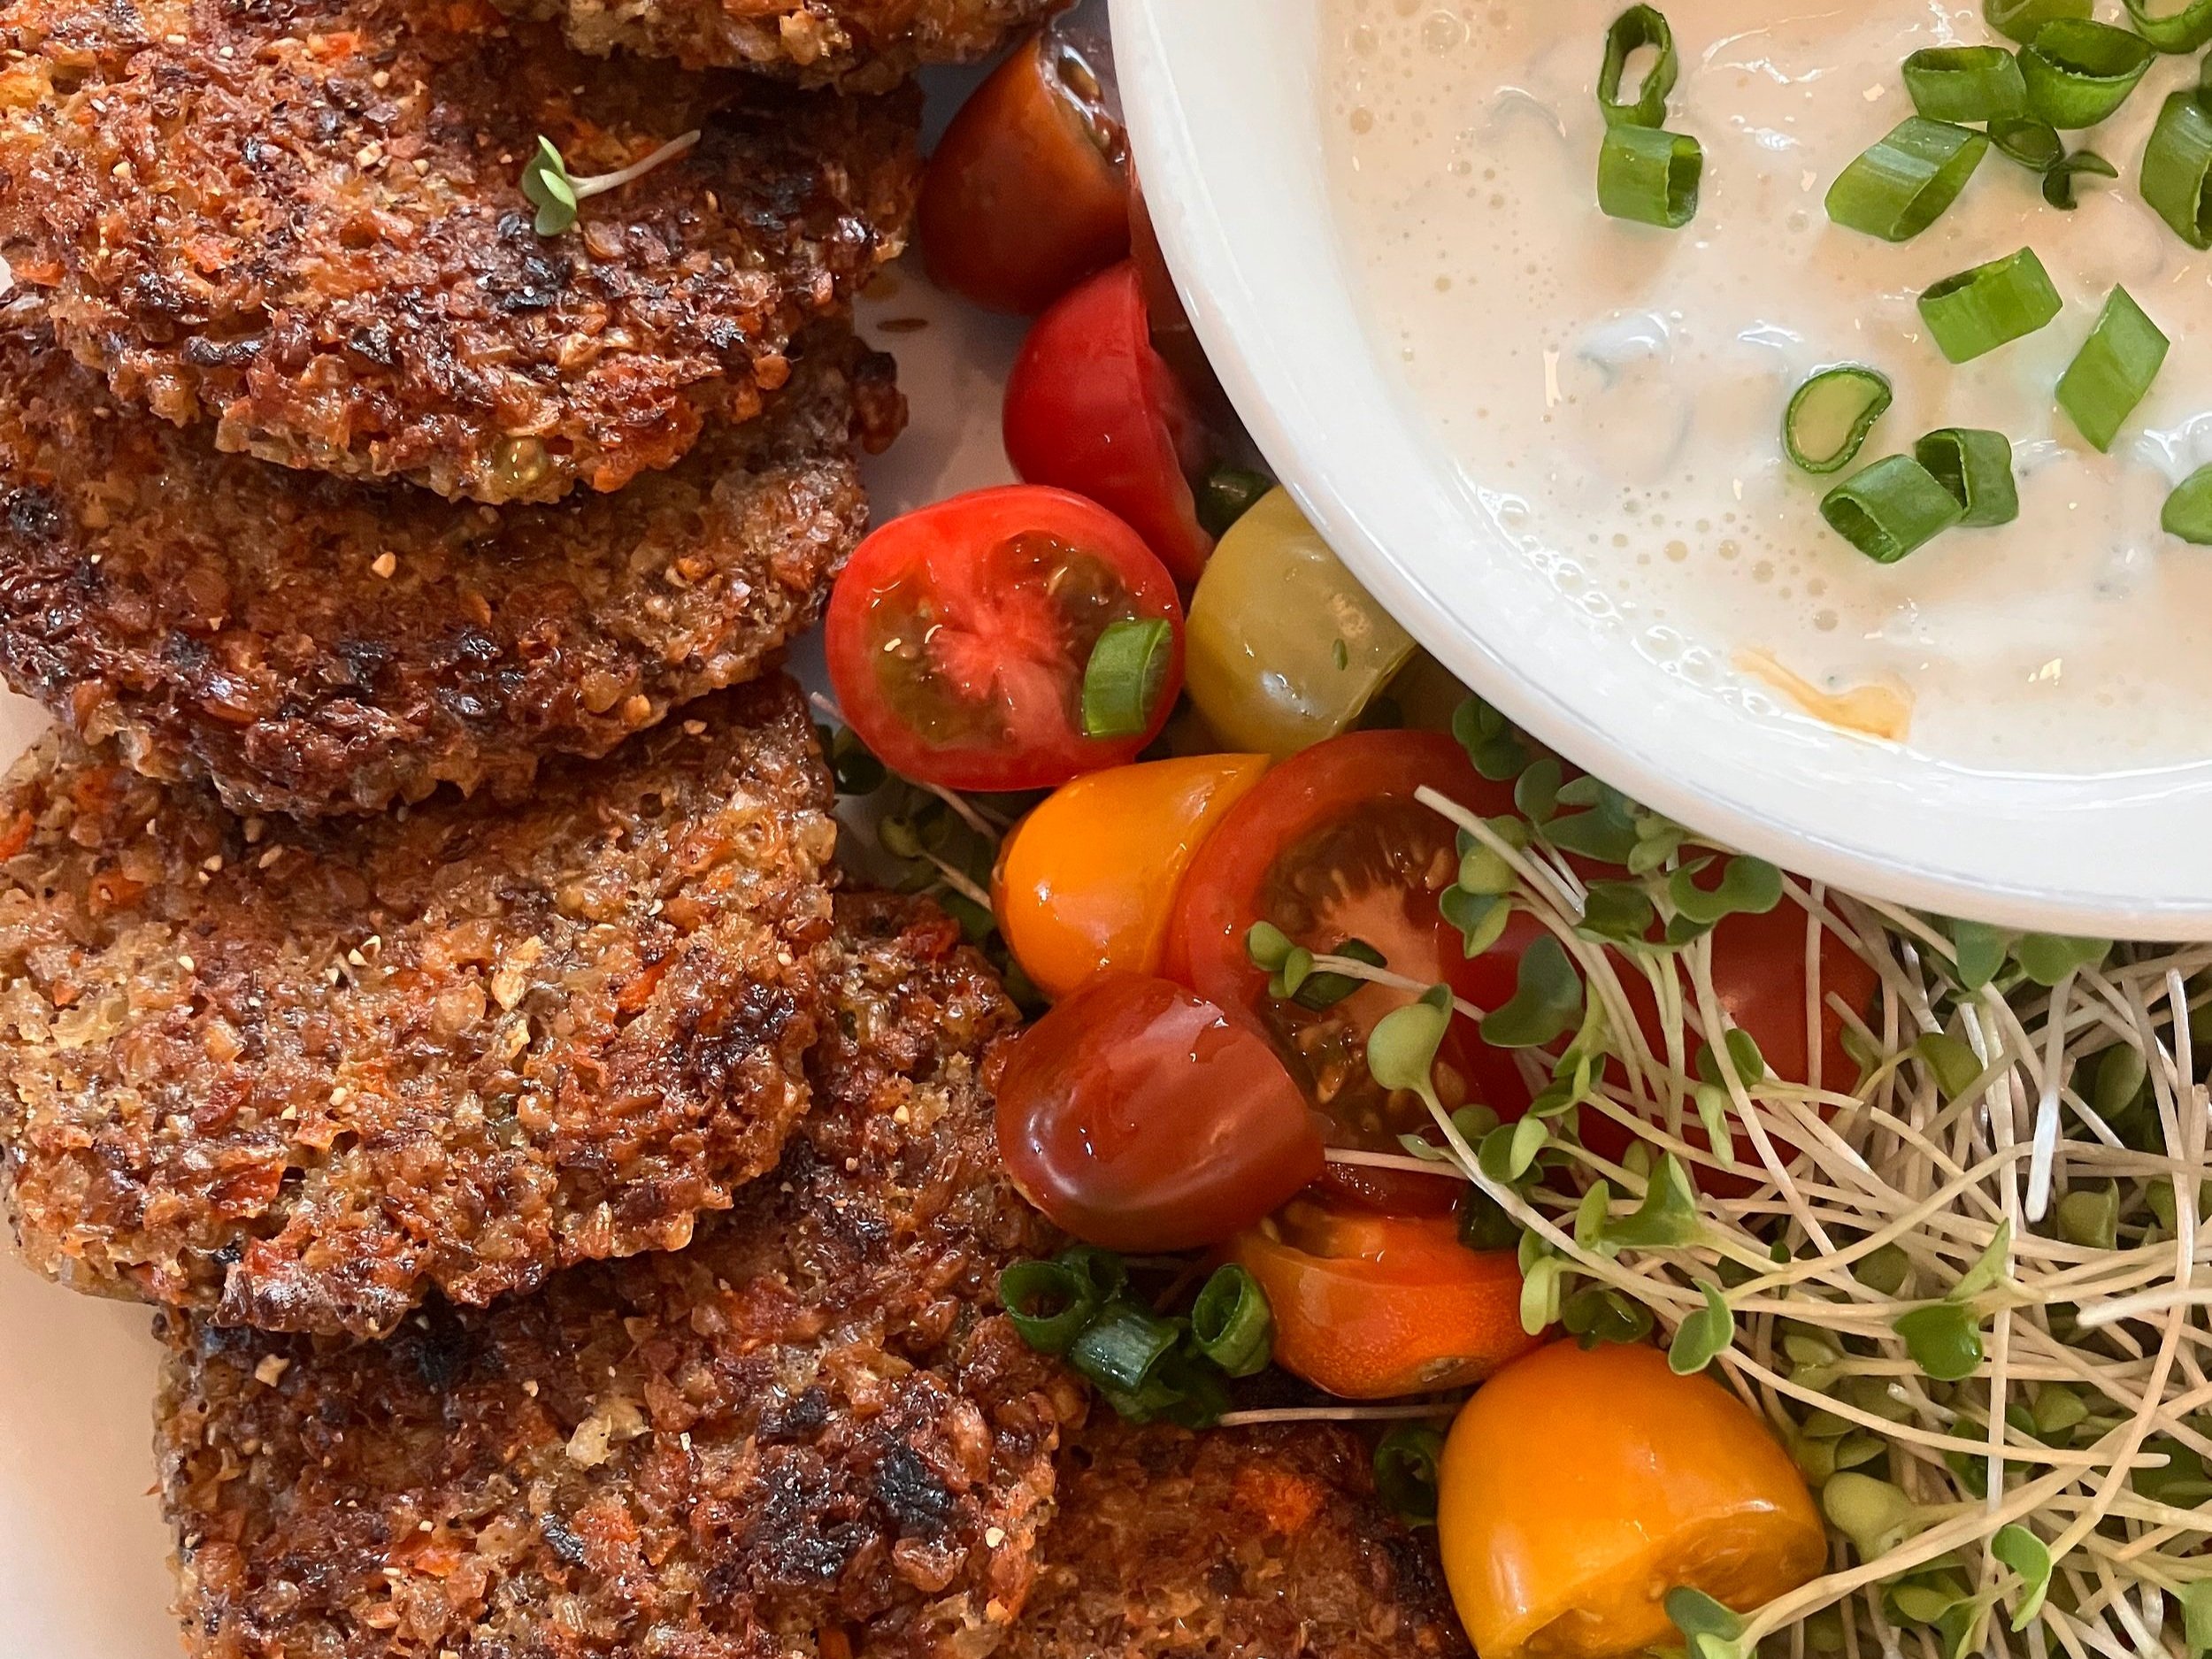 Sprouted Lentil Fritters with Sour Cream Dipping Sauce